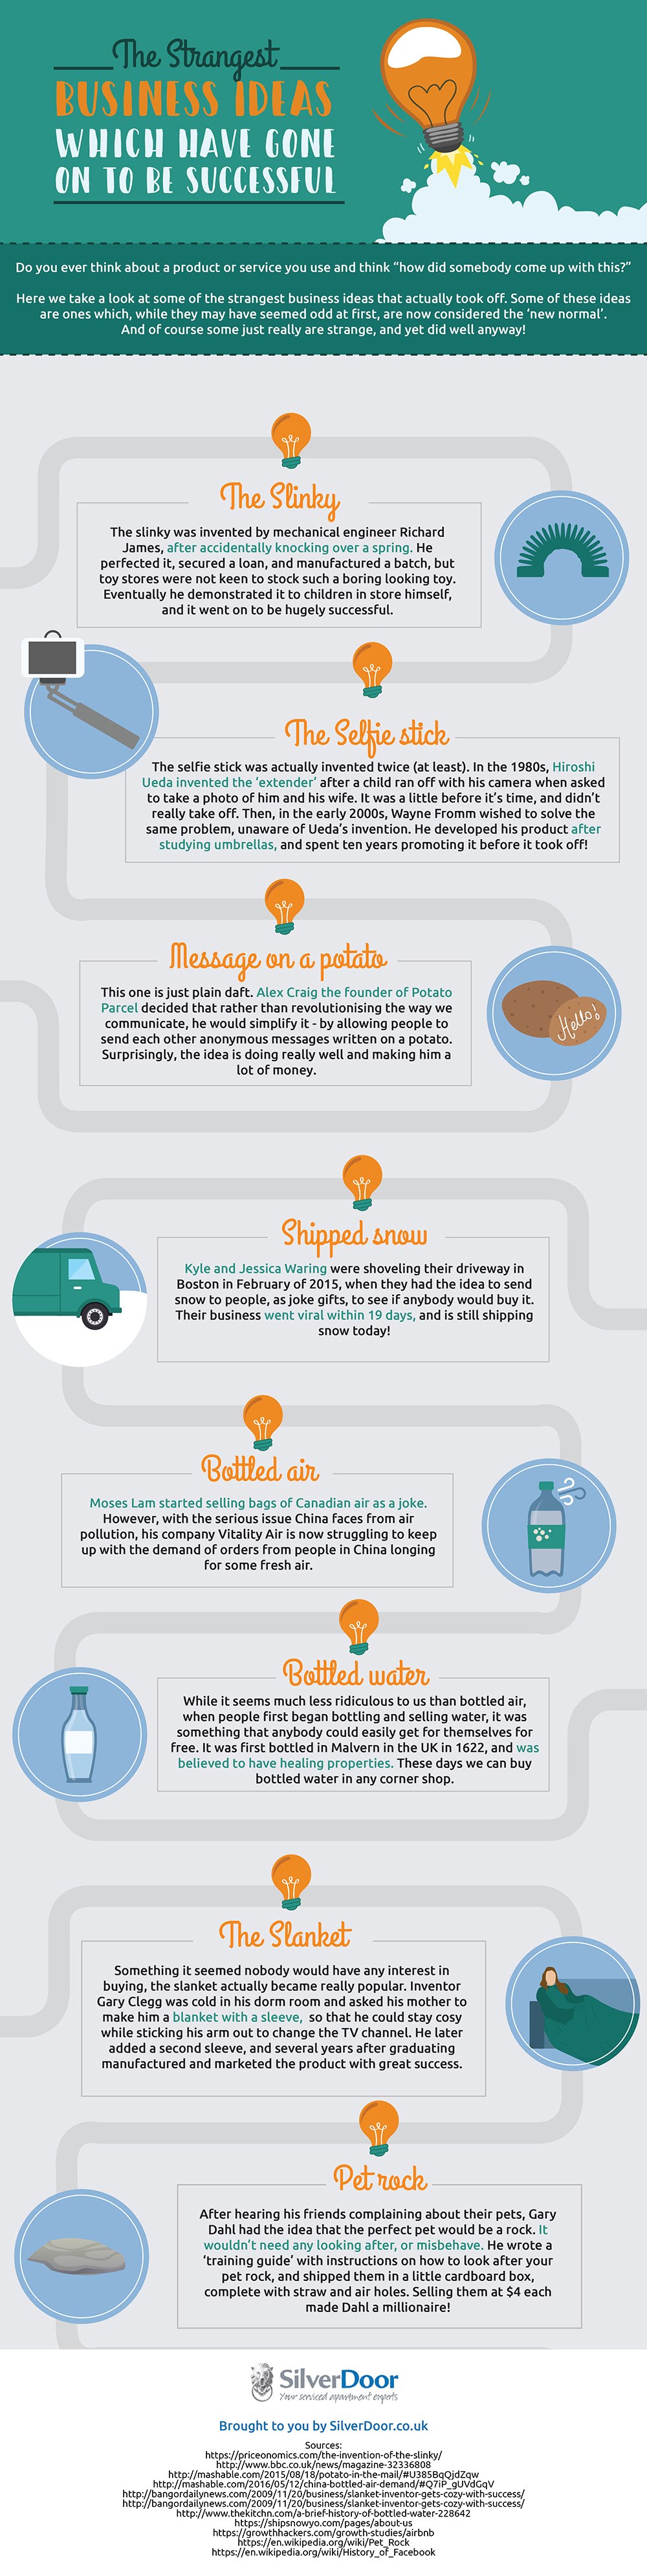 The Strangest Business Ideas Which Have Gone On To Be Successful #Infographic